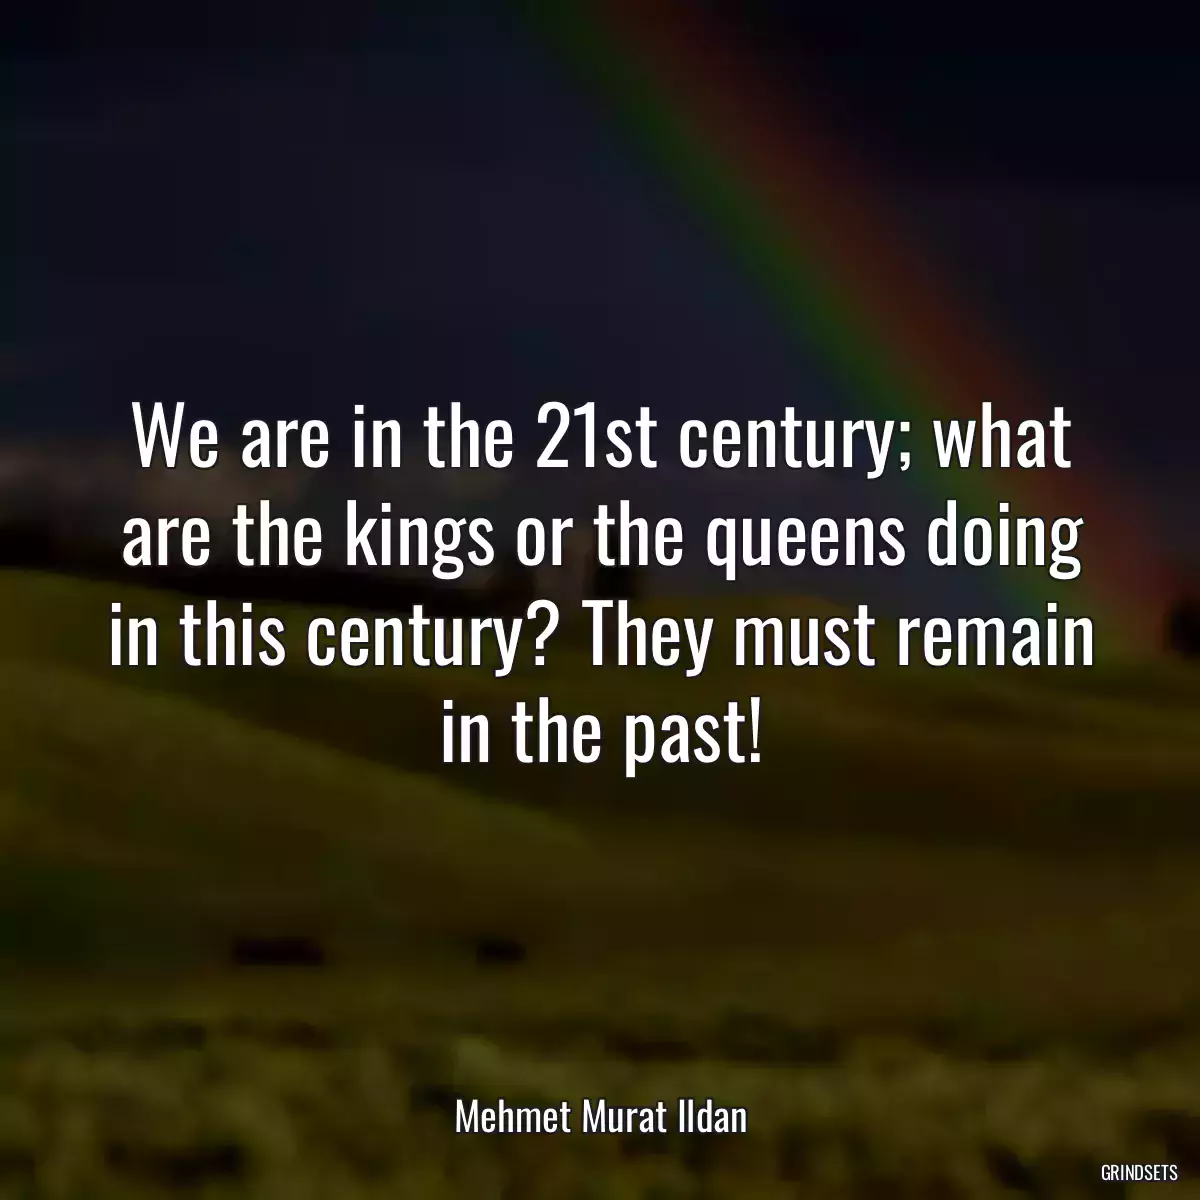 We are in the 21st century; what are the kings or the queens doing in this century? They must remain in the past!